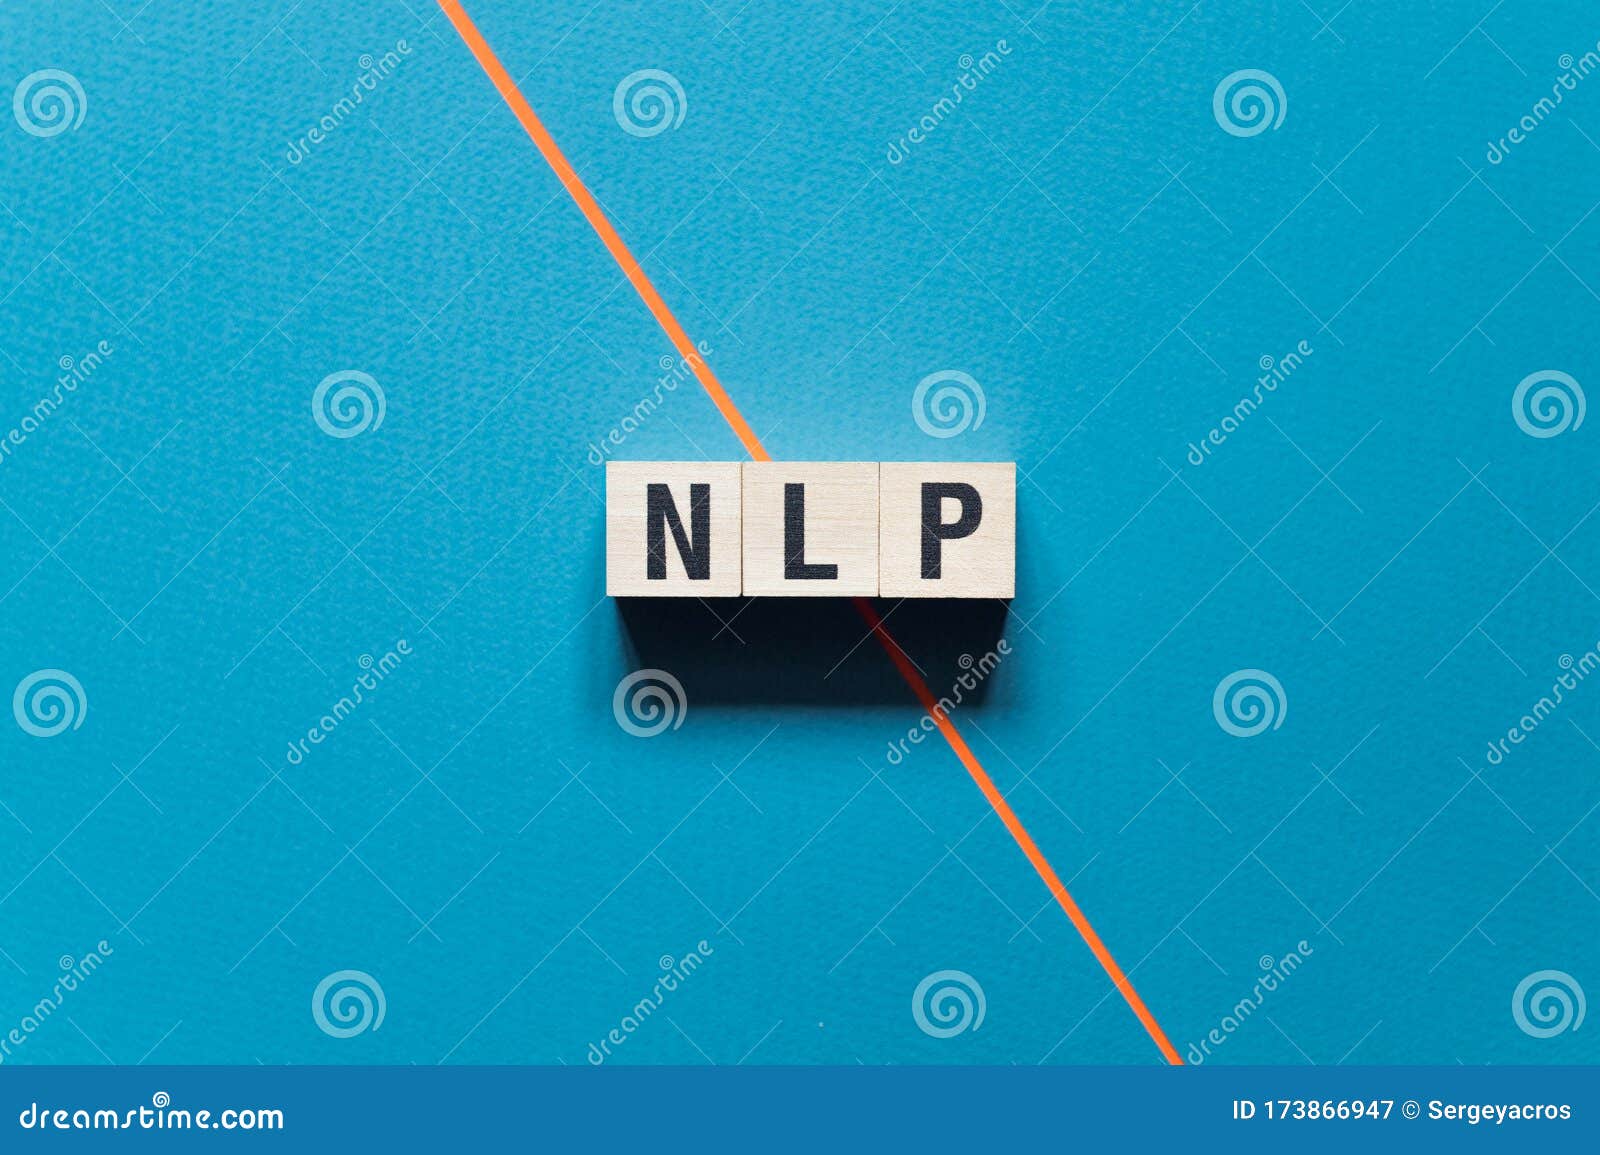 nlp - neuro linguistic programming word concept on cubes